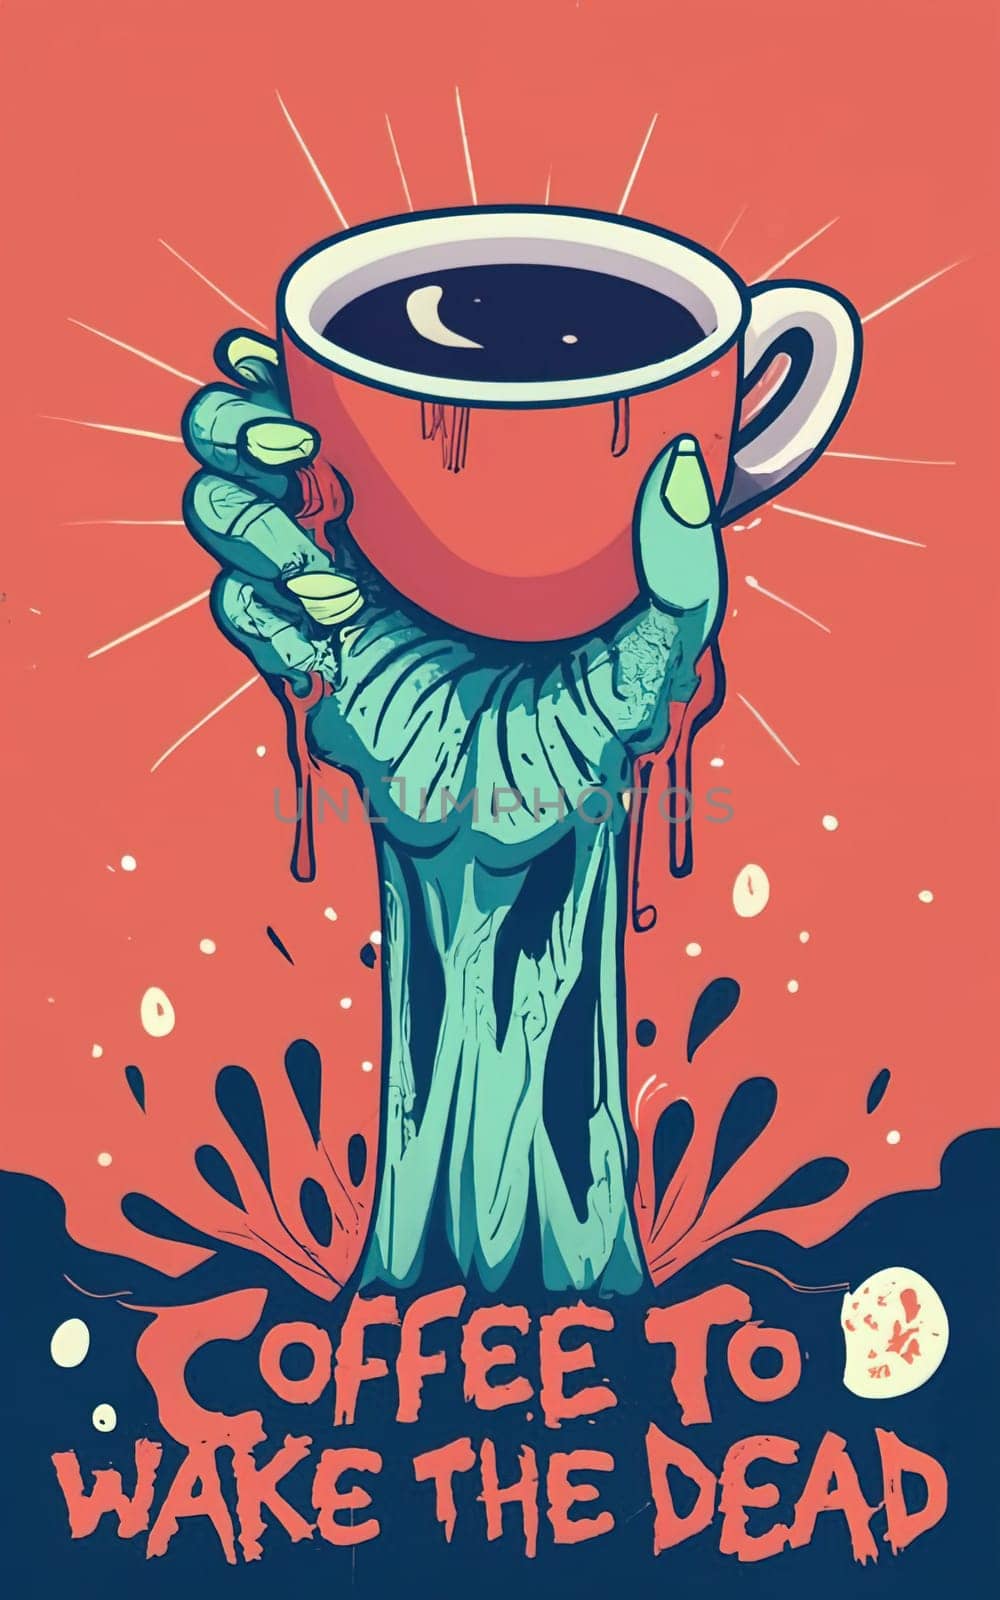 T-Shirt Design: Zombie Hand Rising with Coffee Mug - 'Coffee to Wake the Dead' Typography download image